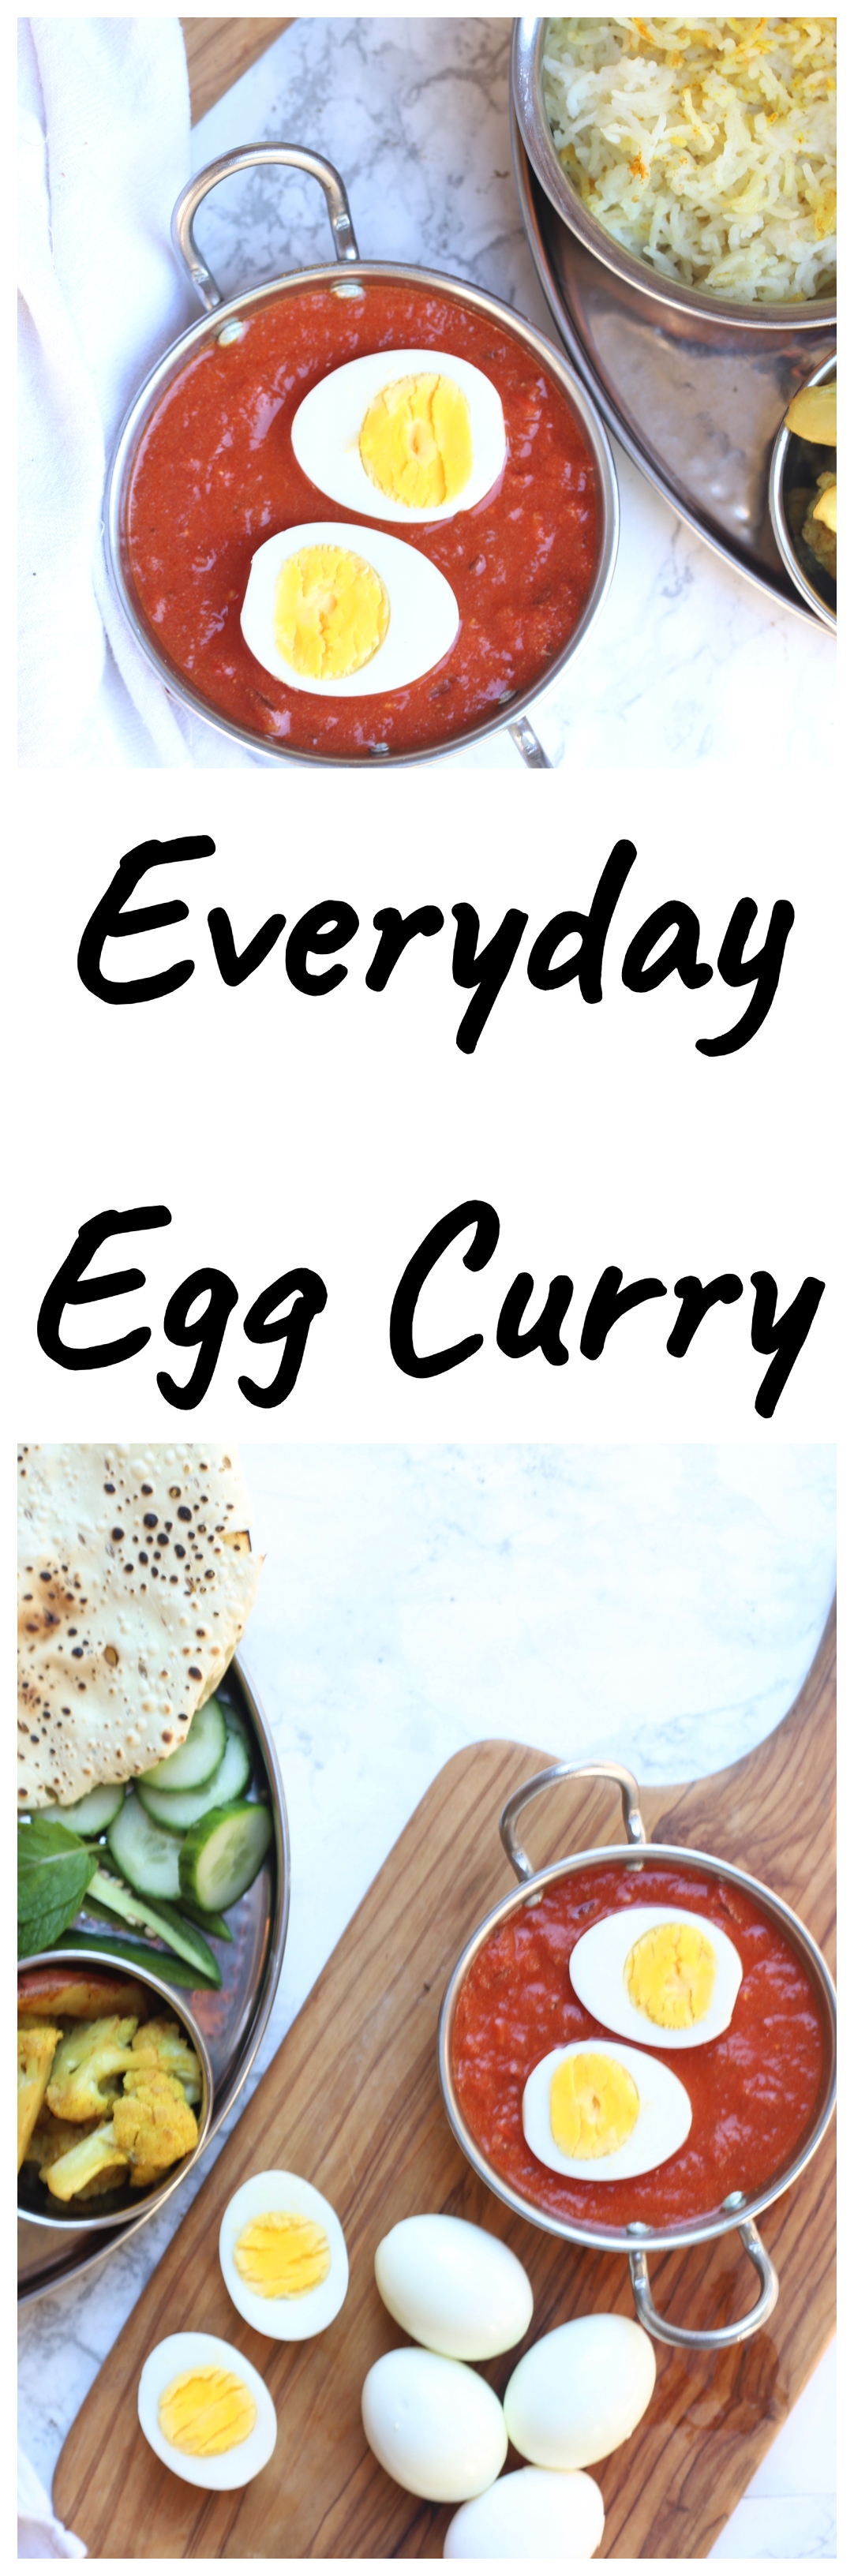 Everyday Egg Curry